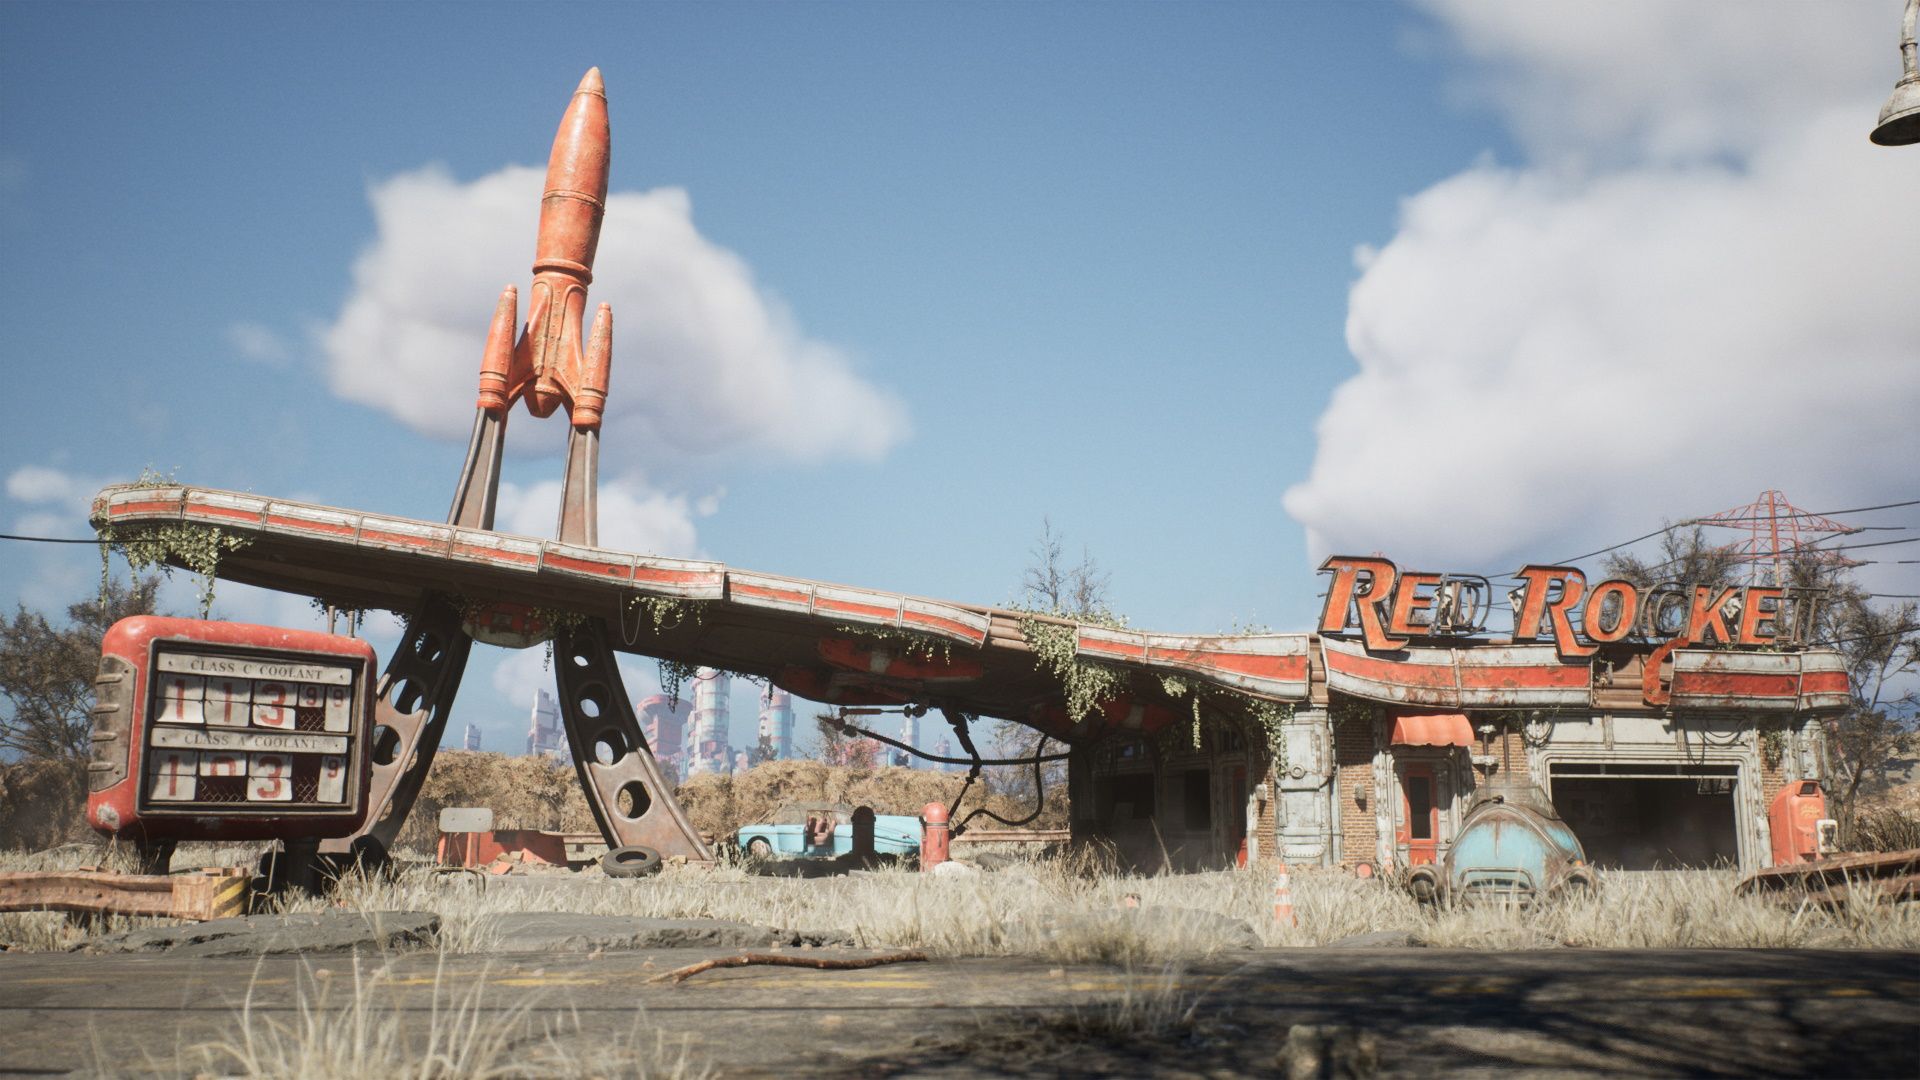 The red rocket fallout 4 фото 87